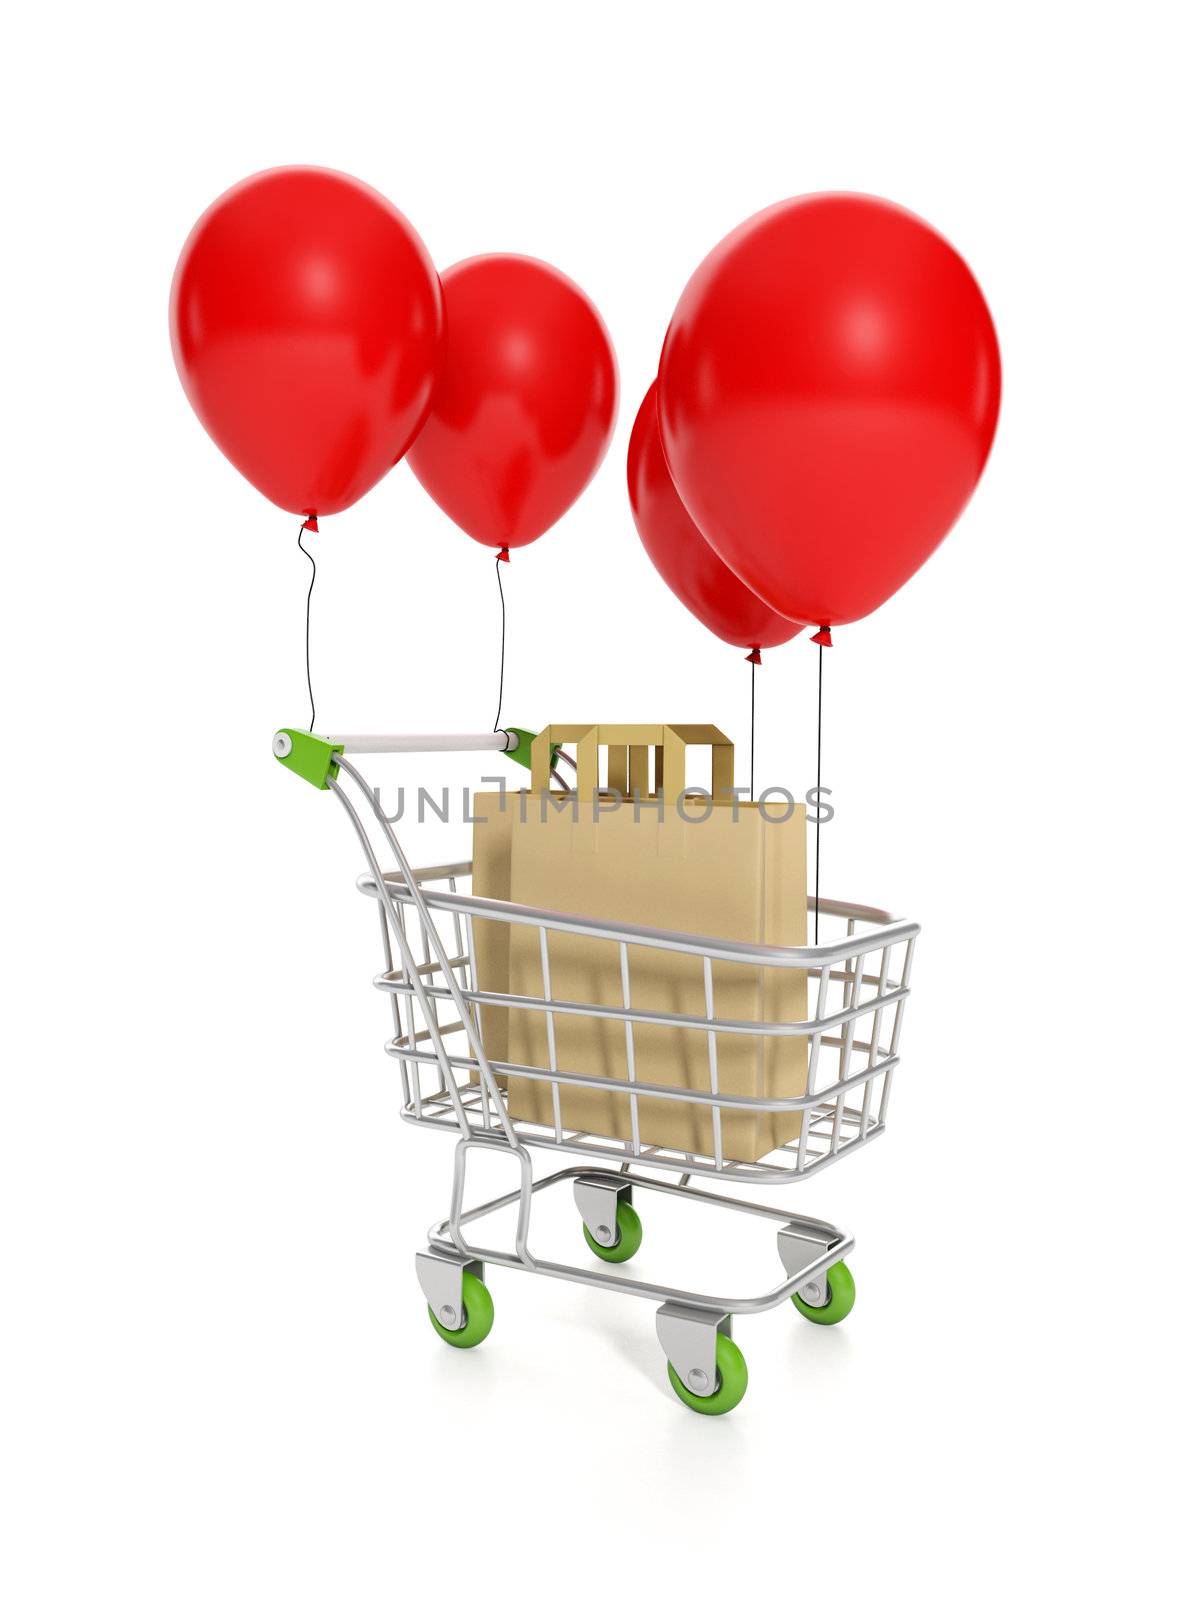 3d illustration: Concept for sale and purchase. Trolley balloon  by kolobsek